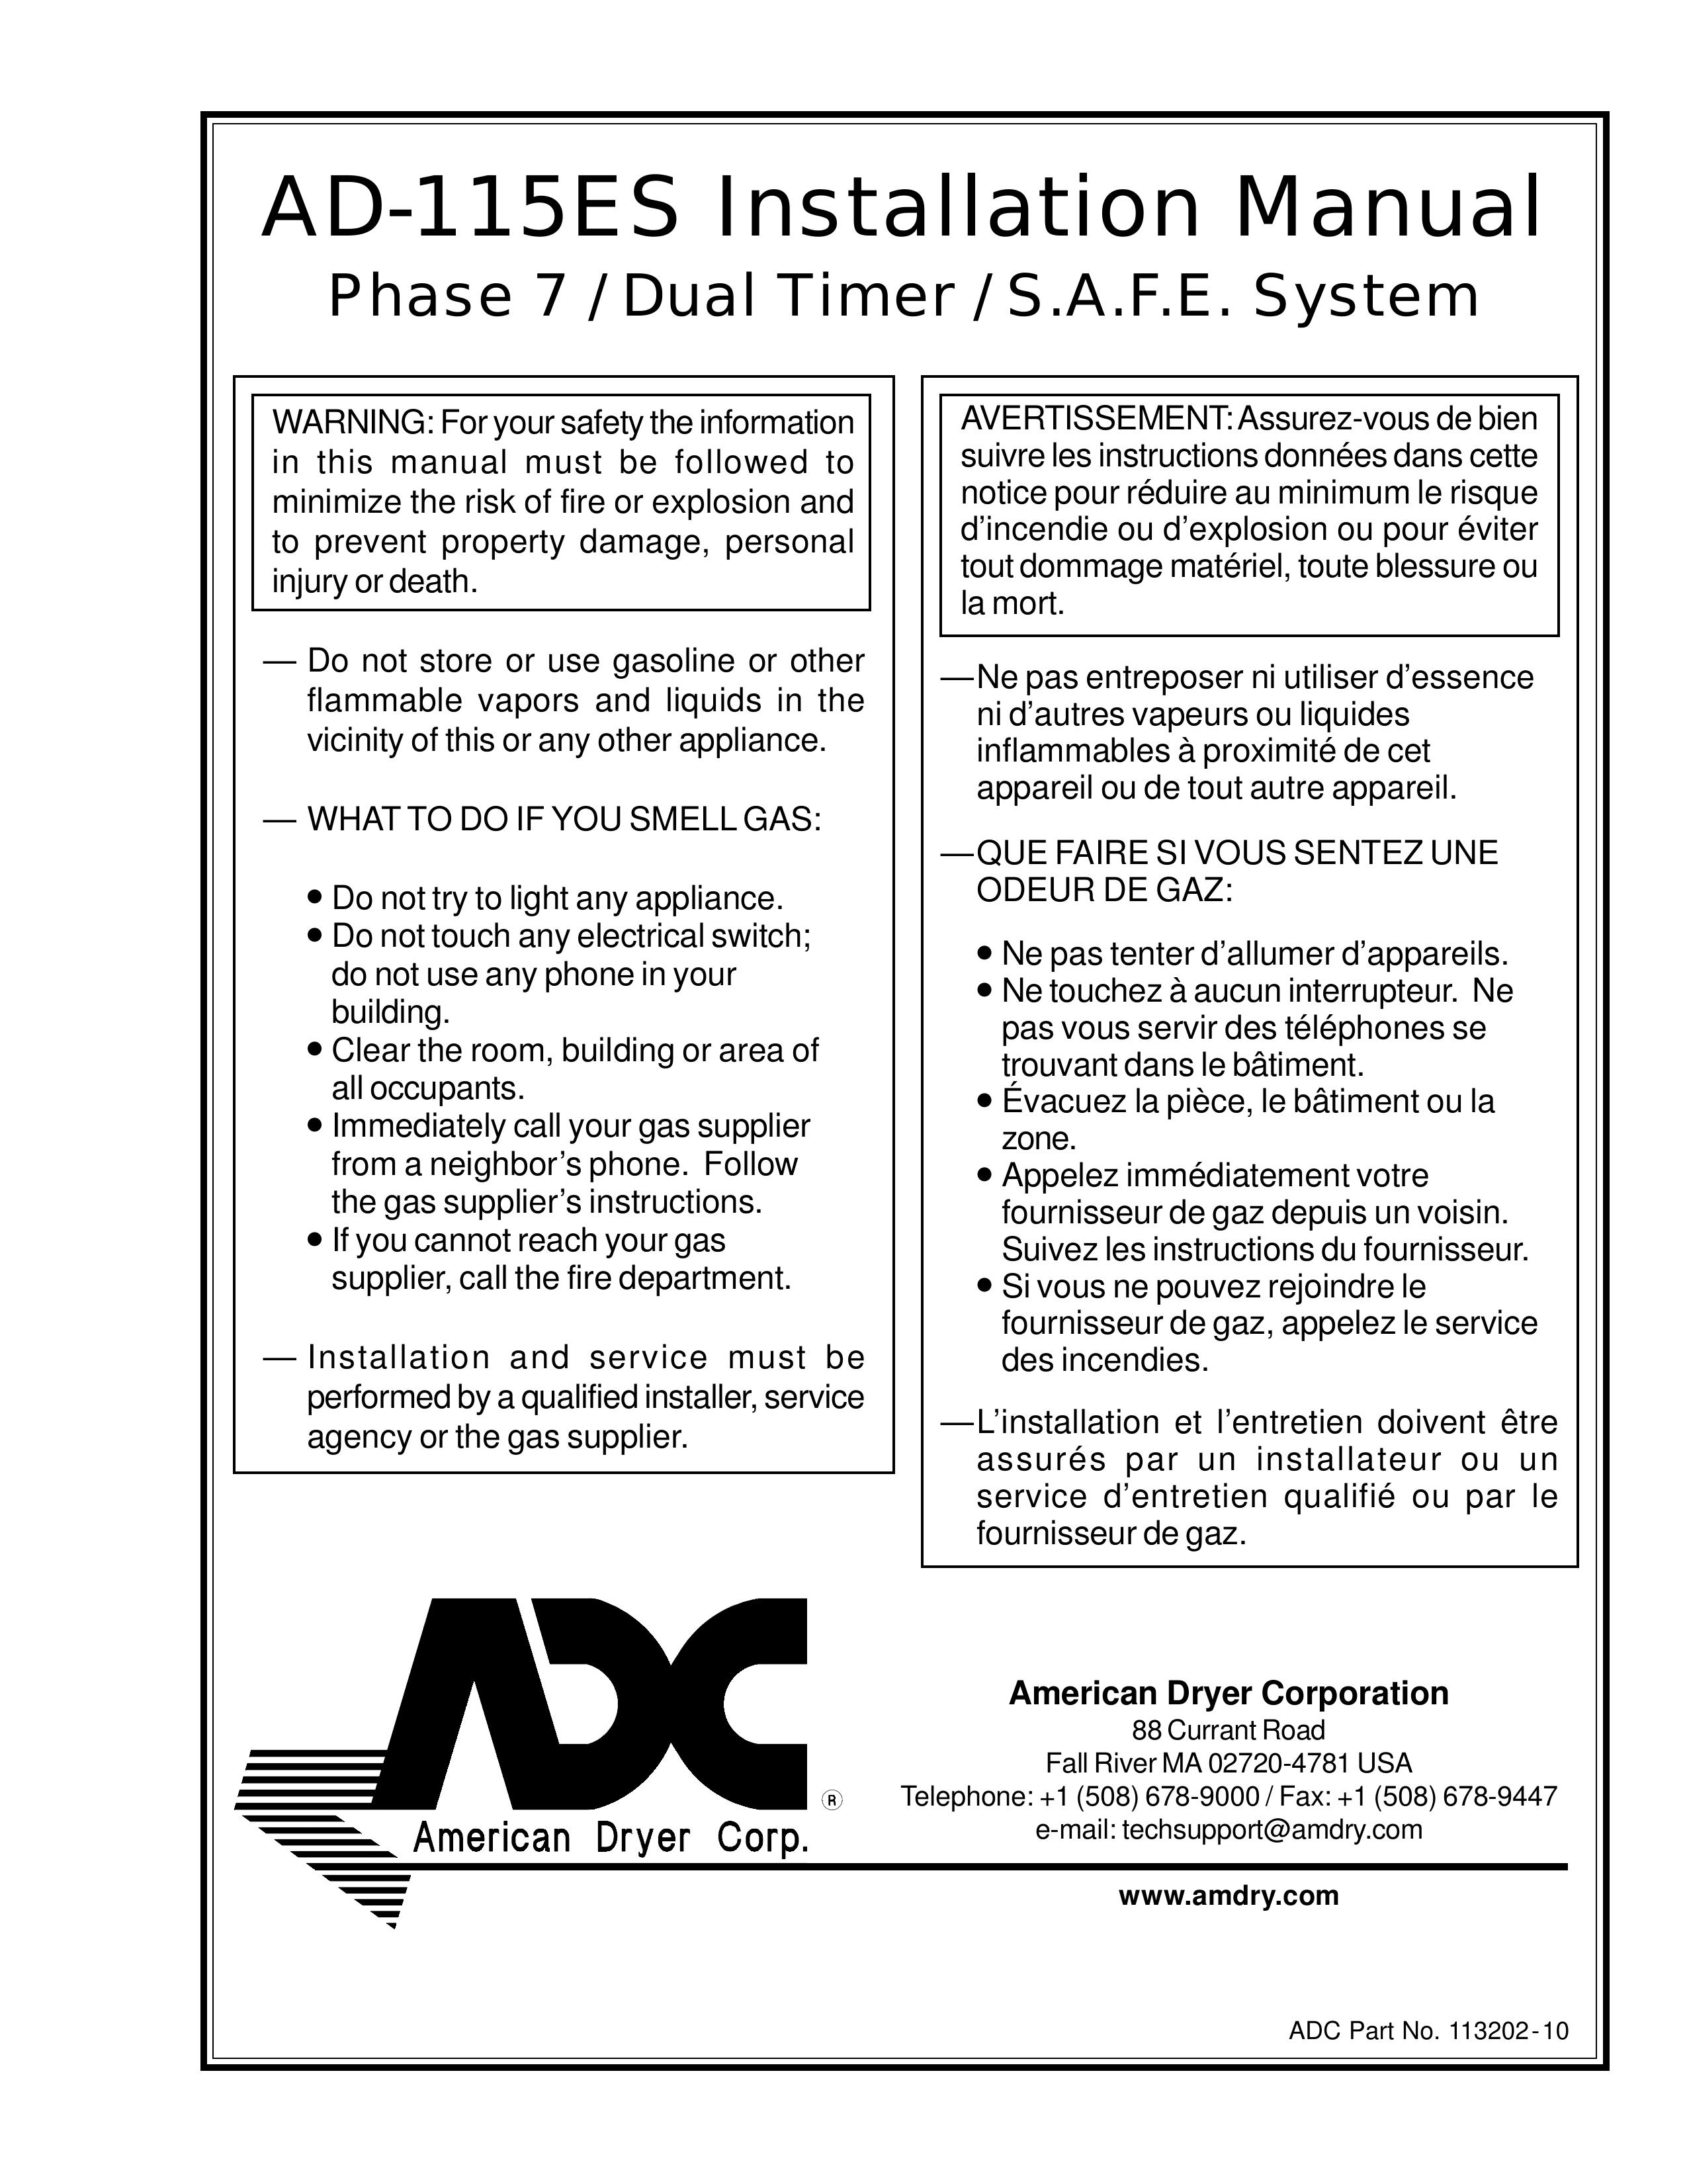 ADC AD-115ES Clothes Dryer User Manual